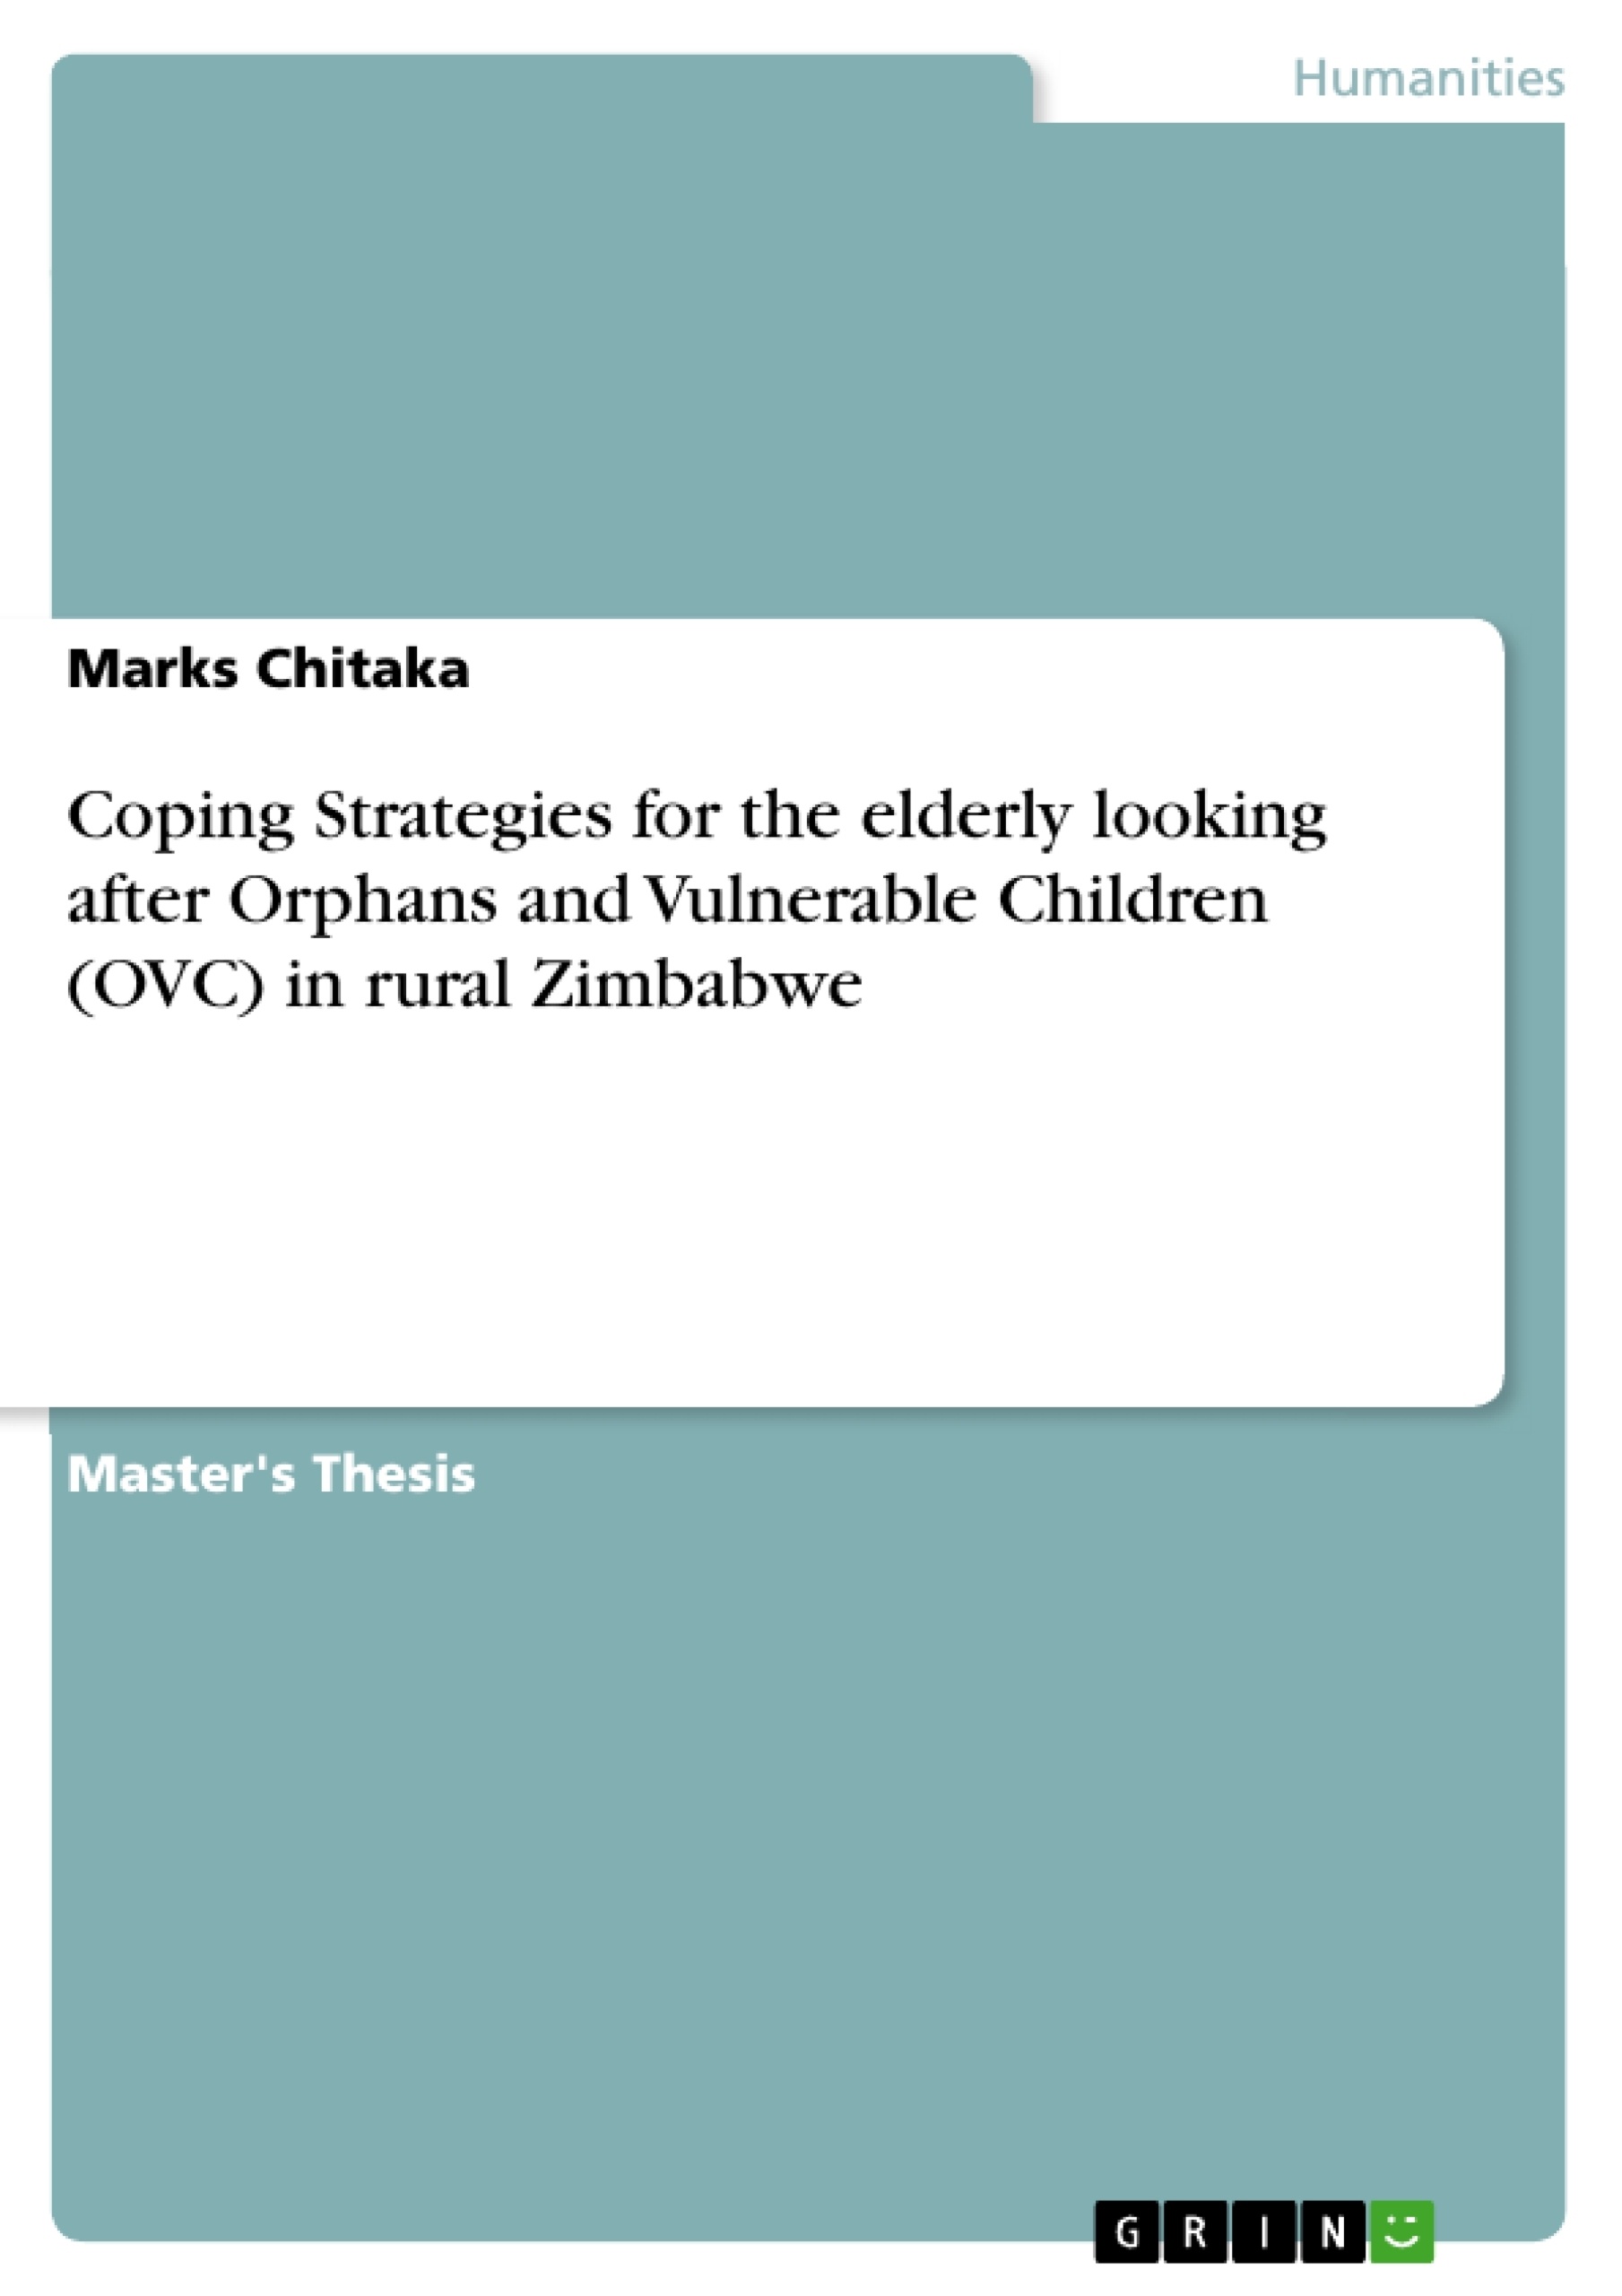 Titre: Coping Strategies for the elderly looking after Orphans and Vulnerable Children (OVC) in rural Zimbabwe